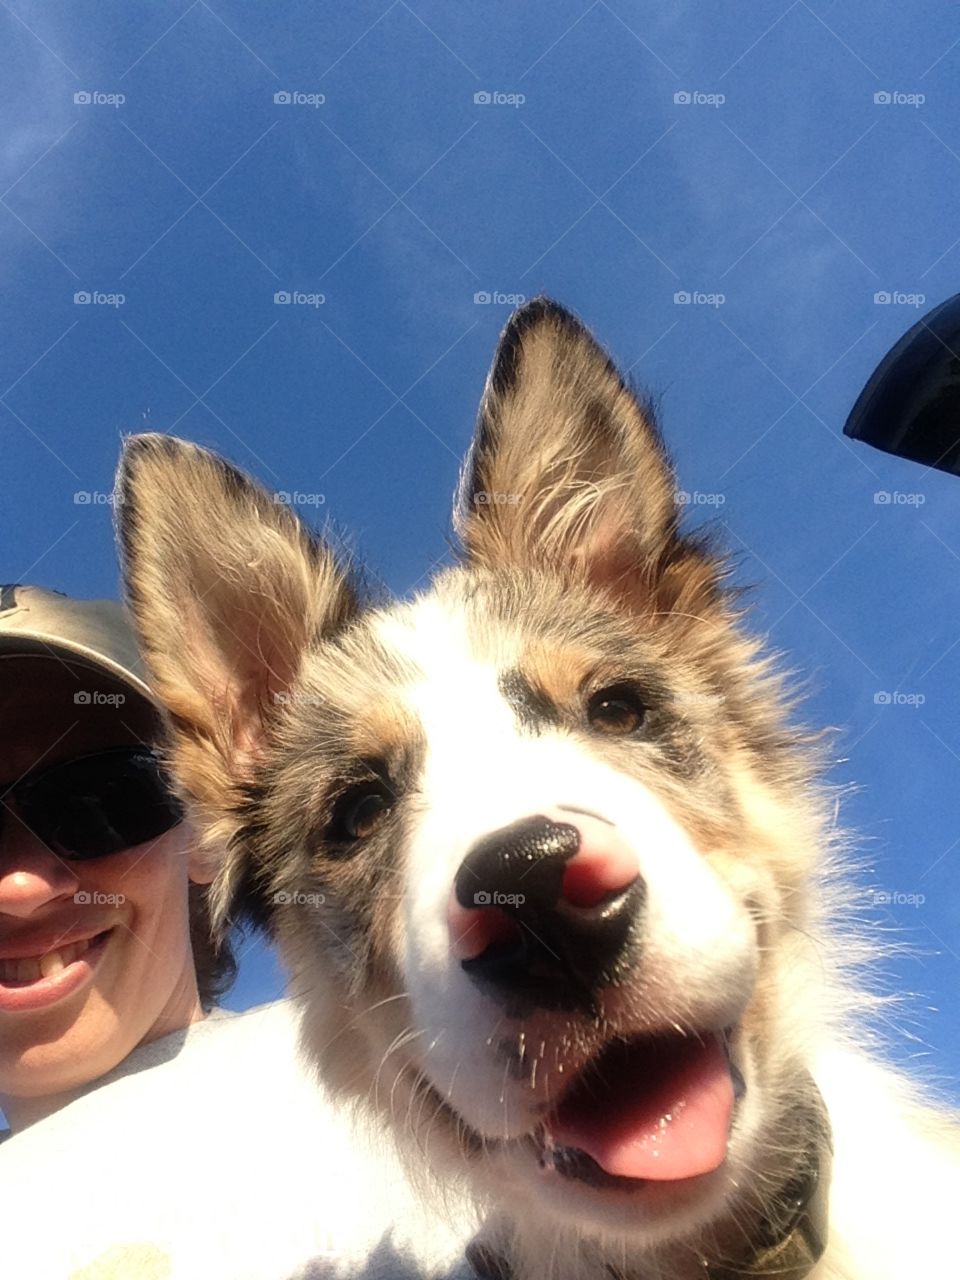 Miggy Selfie. Border Collie hanging with me on a sunny day.